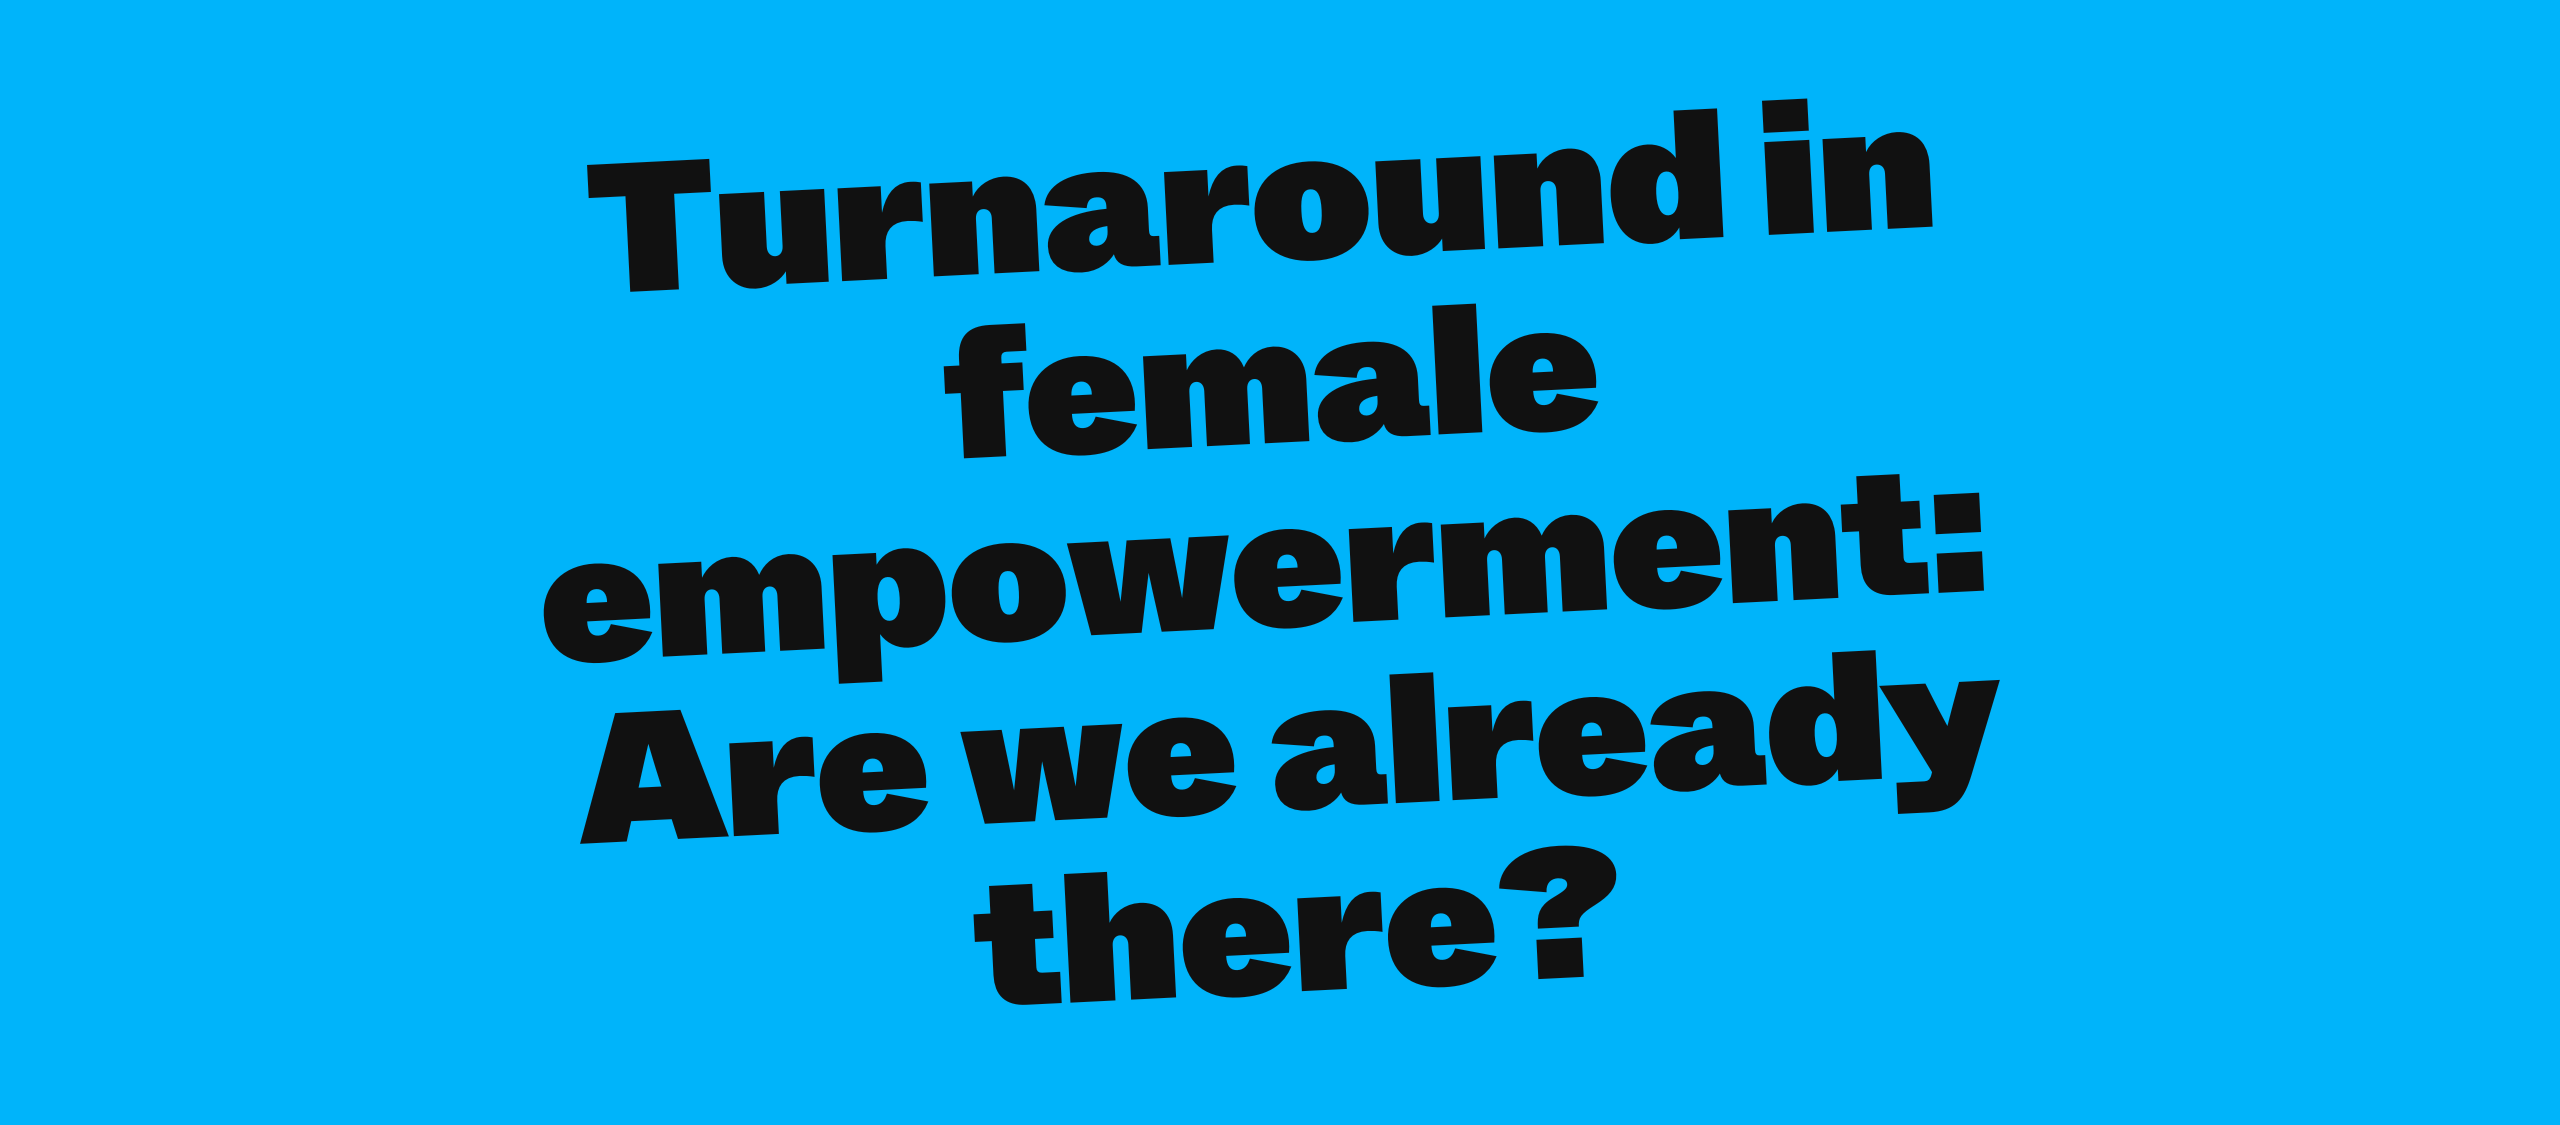 Turnaround in female empowerment: Are we already there?